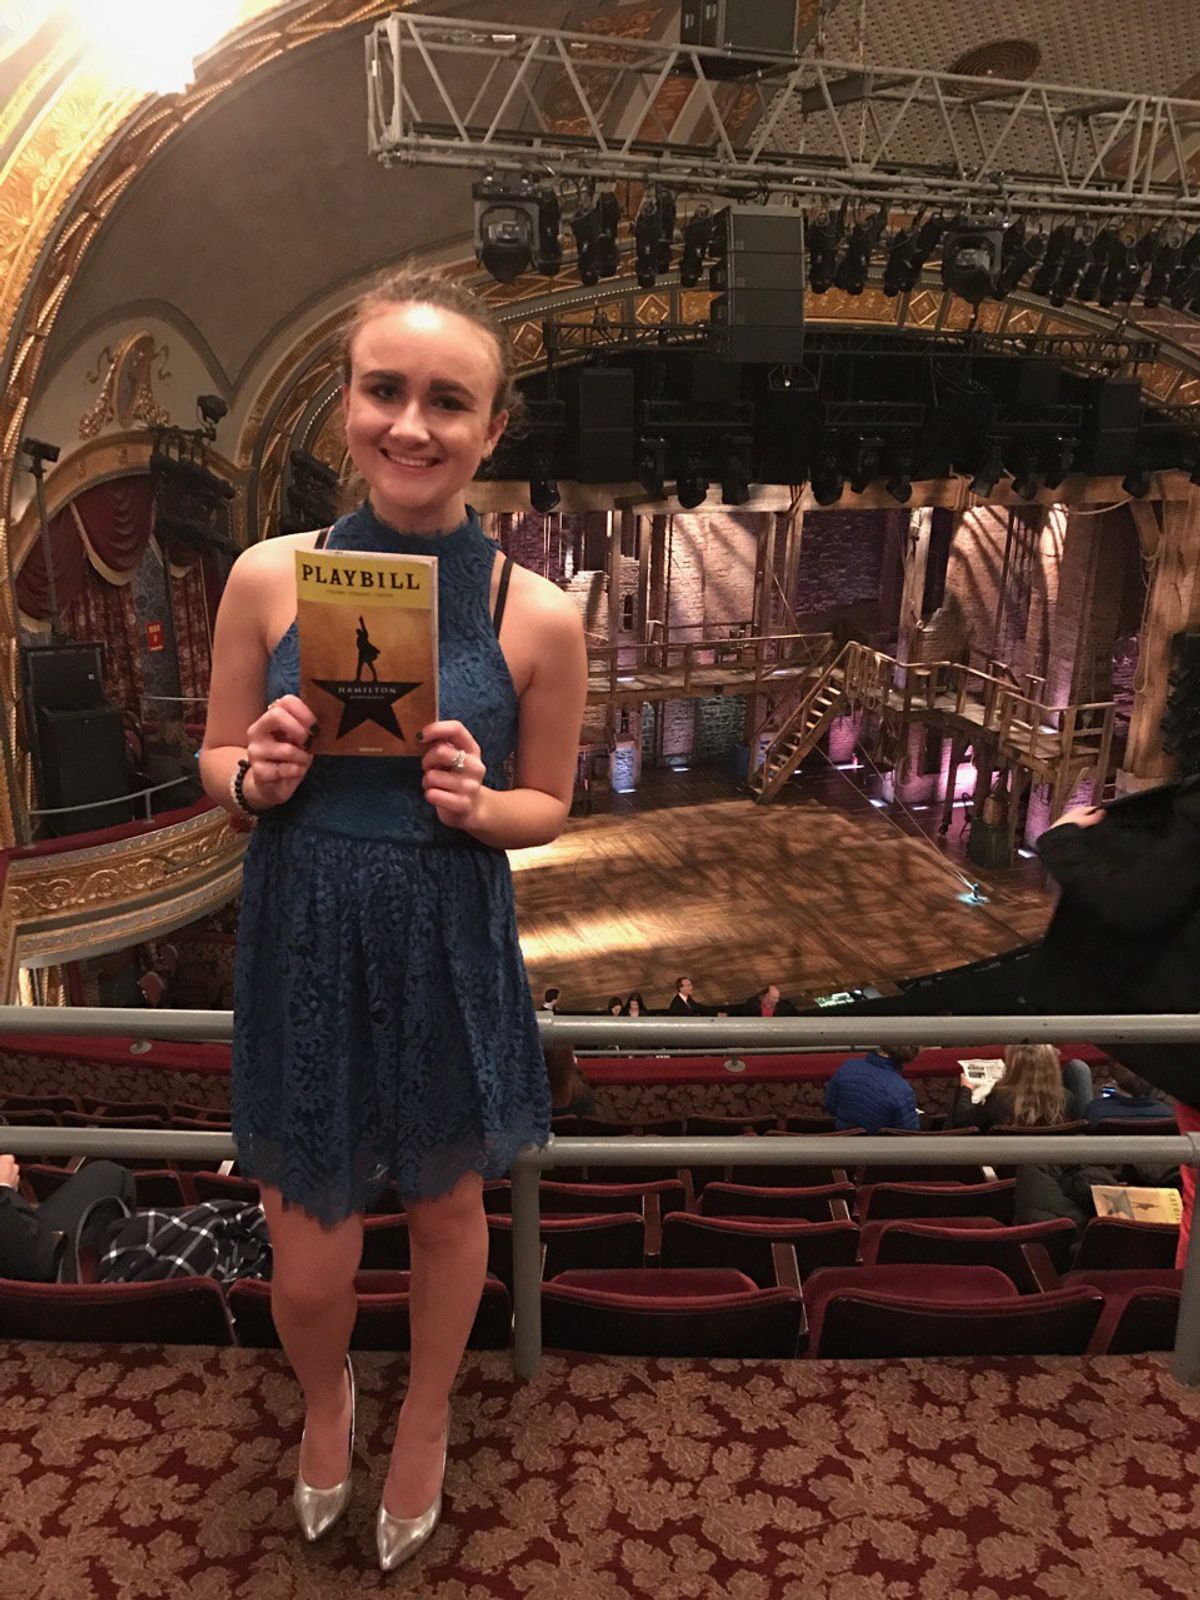 In The 'Greatest City In The World': I Finally Saw 'Hamilton'